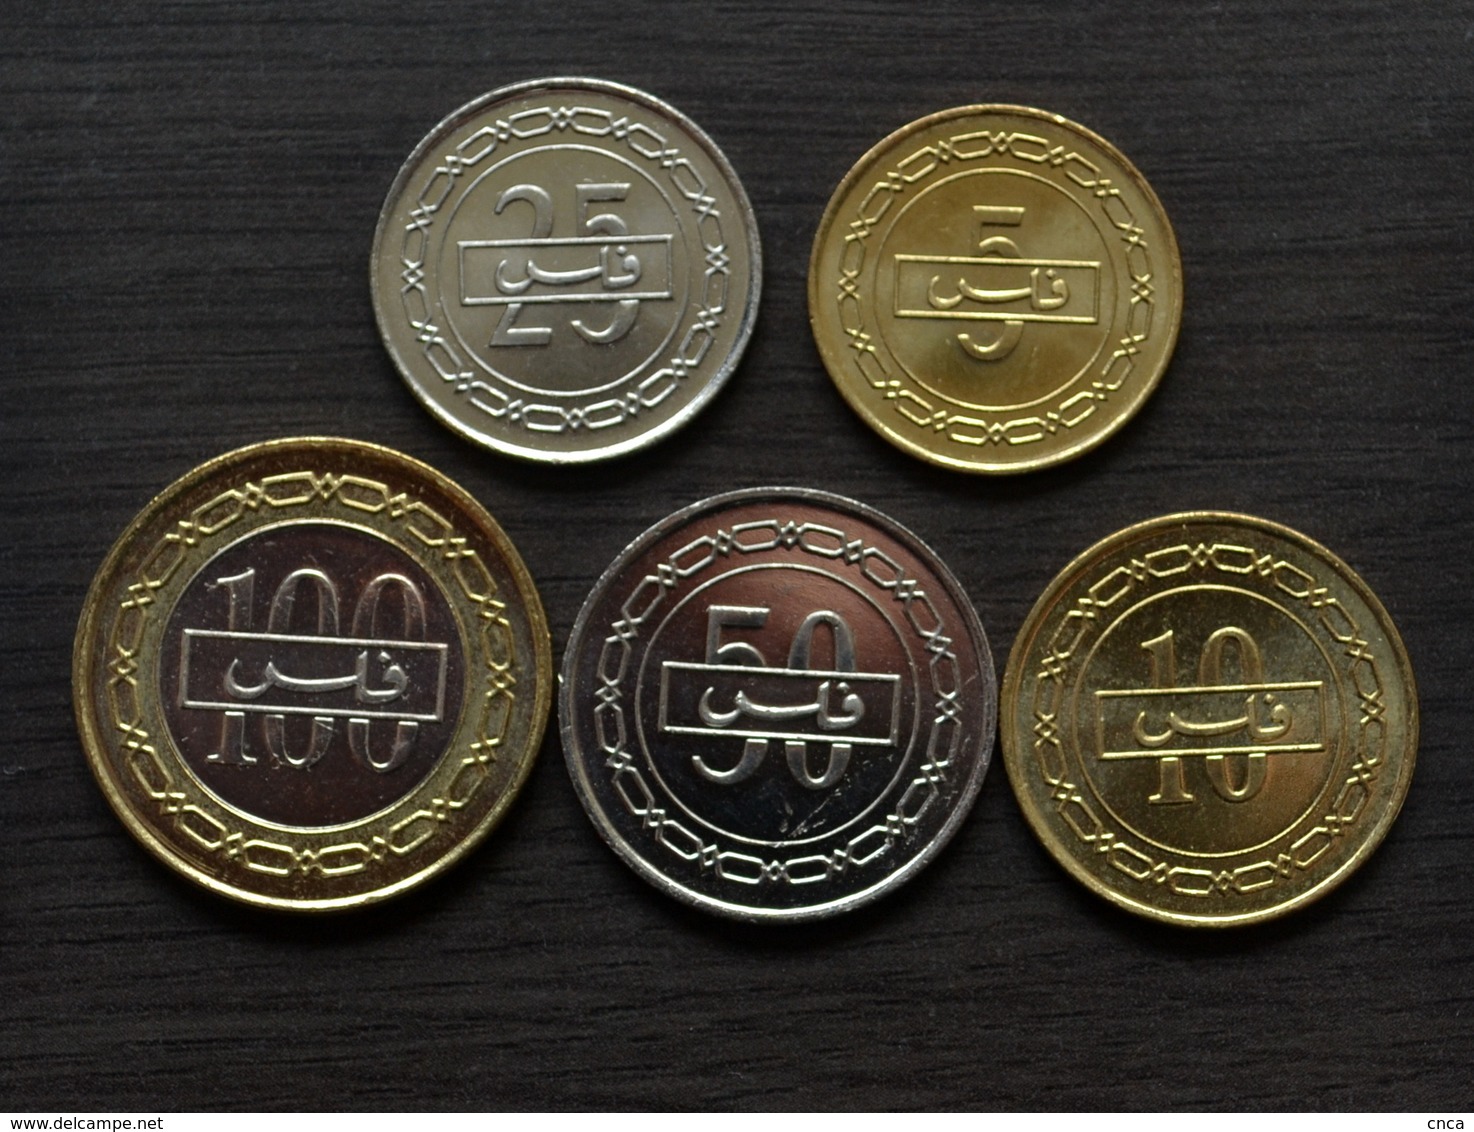 Bahrain 1 SET OF 5 COINS 5+10+25+50+100 UNC COIN MIDDLE EAST CURRENCY - Bahrain